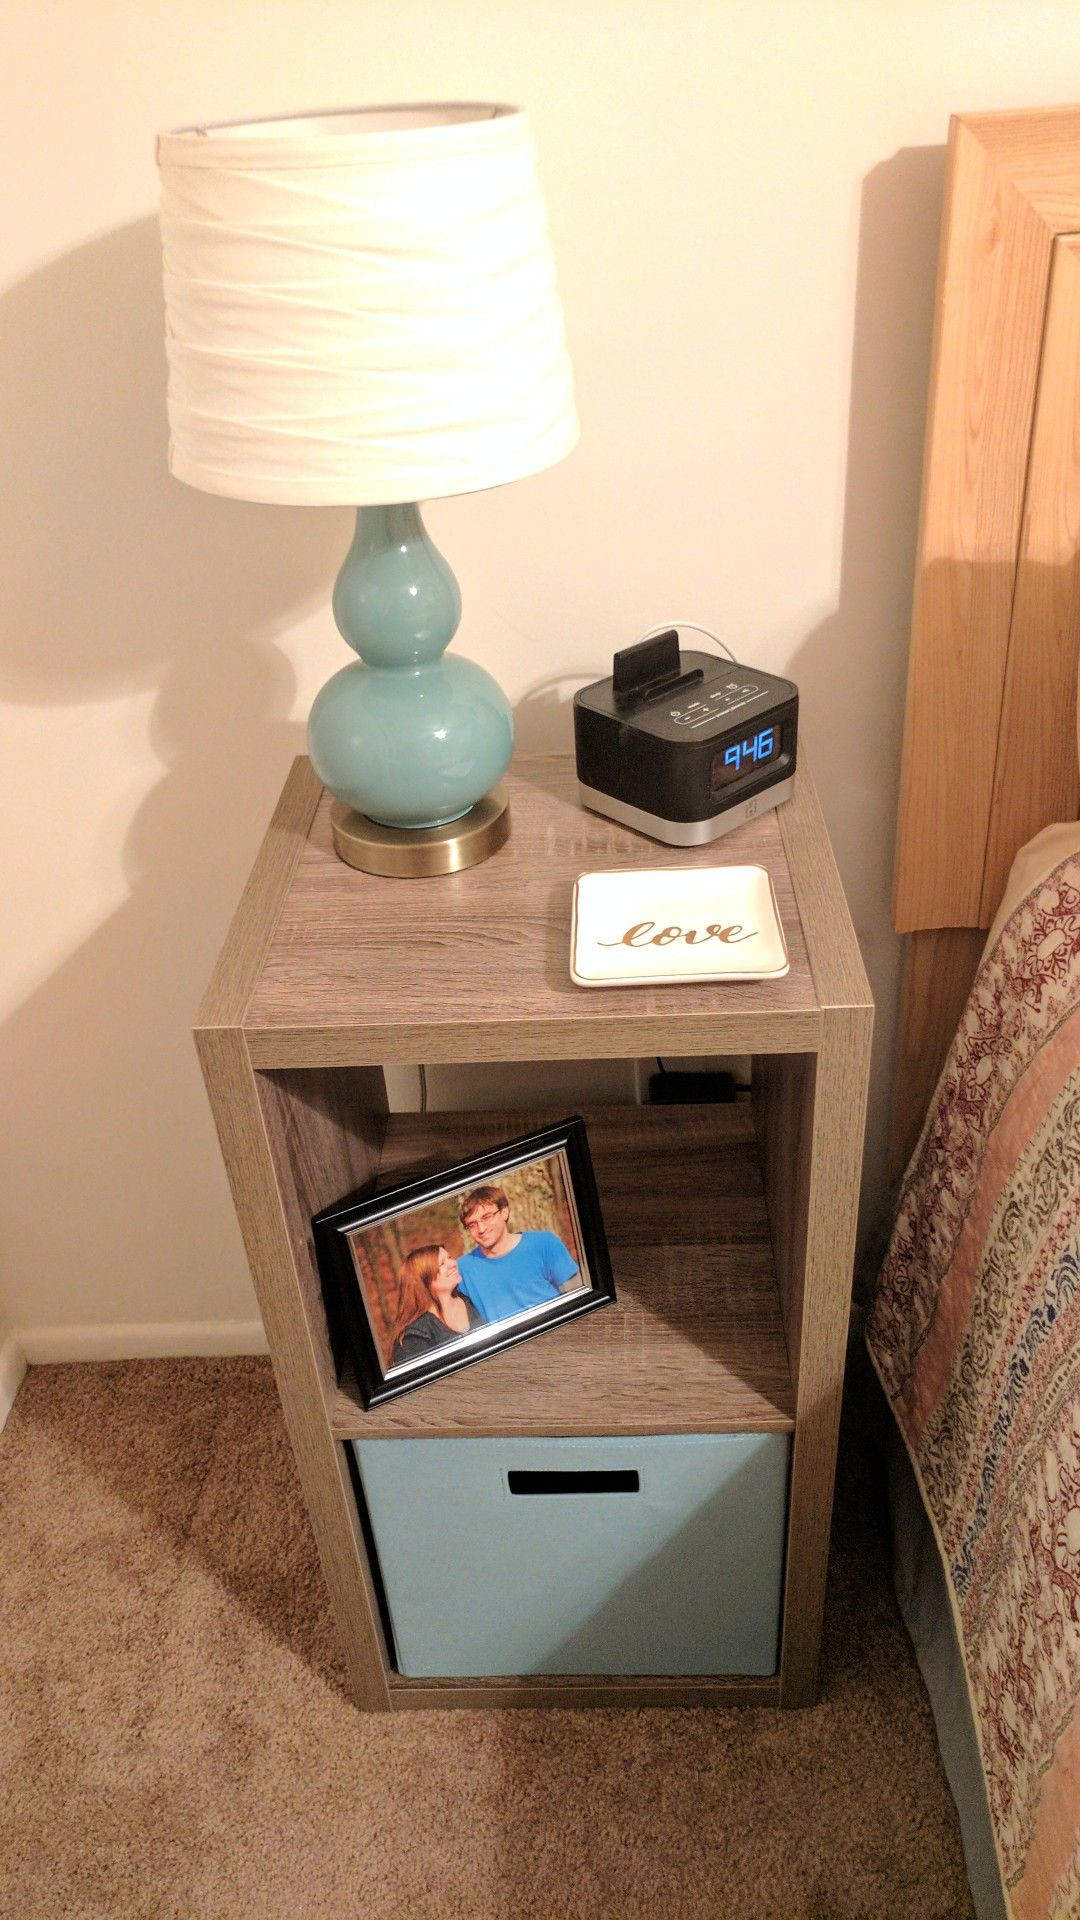 Bedroom Cube Storage
 Storage cubes as a nightstand Minimalist styling